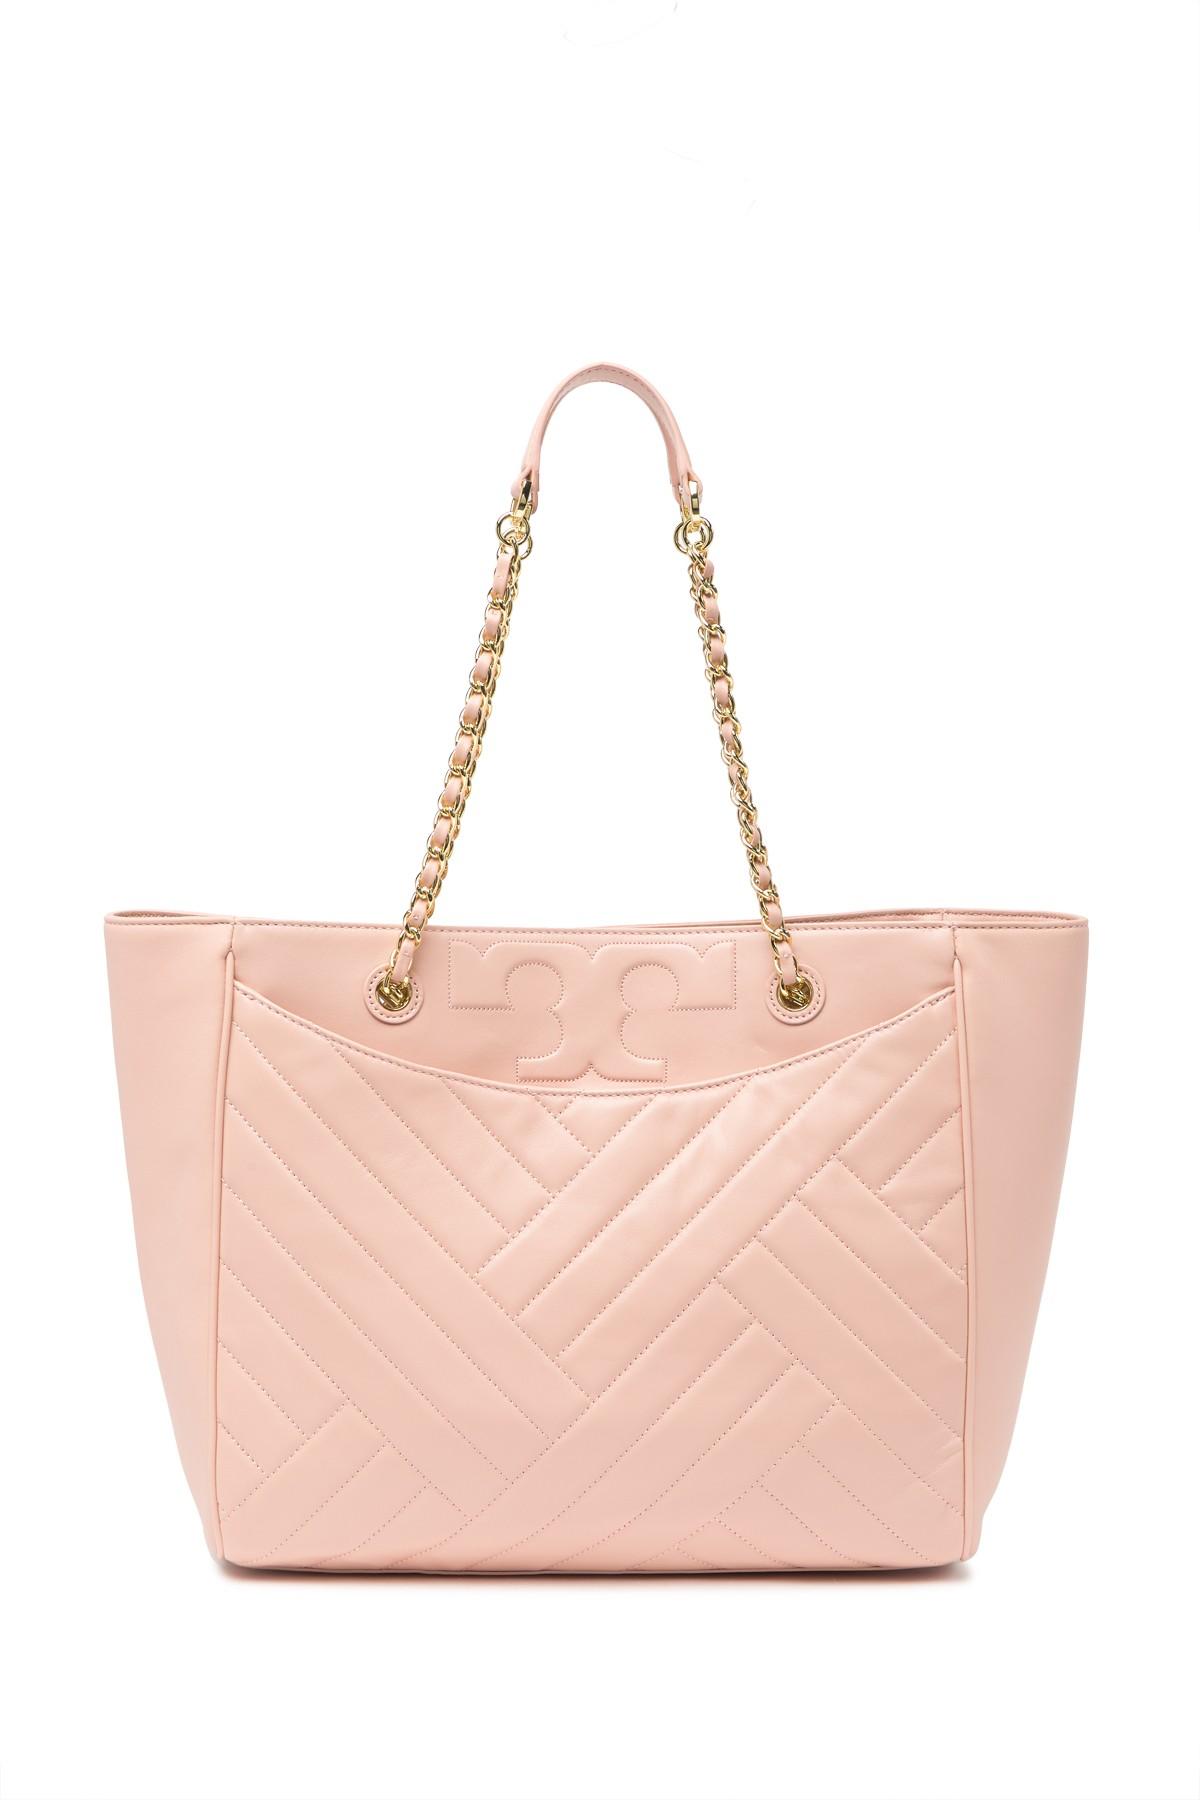 Tory Burch Alexa Quilted Tote in Pink